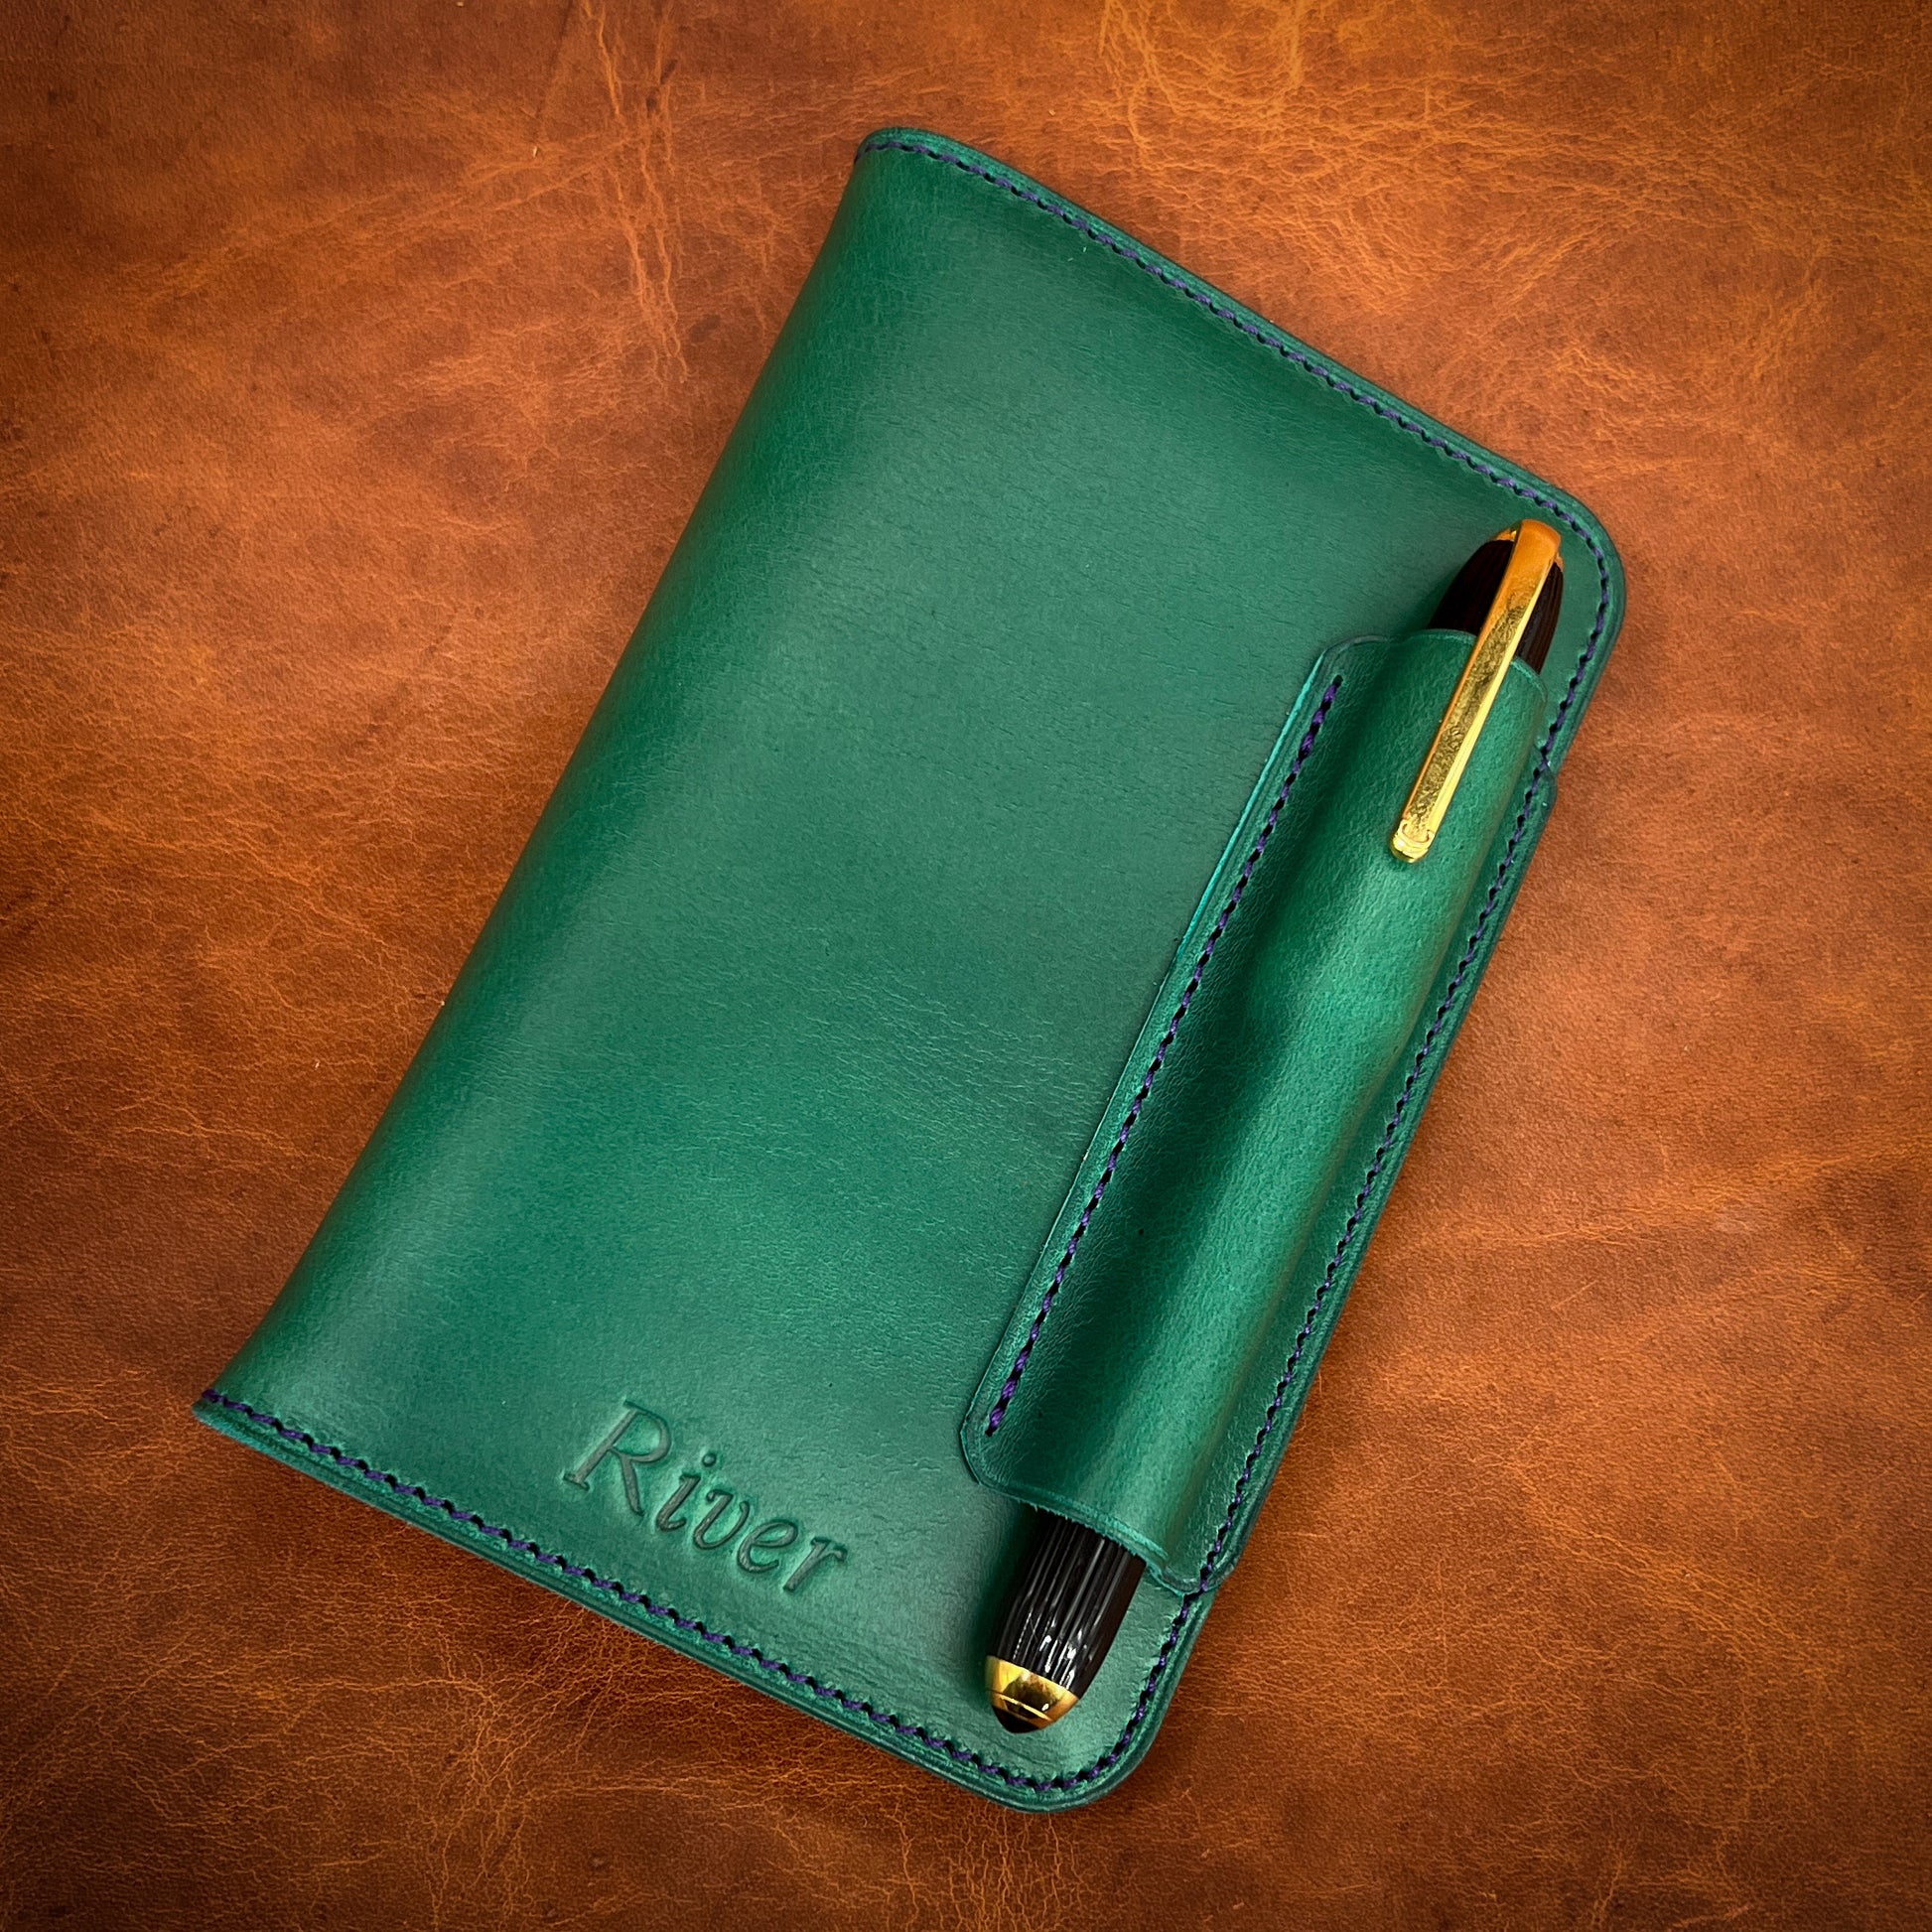 Golf Green Horween Notebook Cover with Pen Holder Stitched on the top.  Unusual Purple Accent Stitching and Cartier Pen.  Bespoke notebook cover by Custom Leather and Pen in Houston, TX